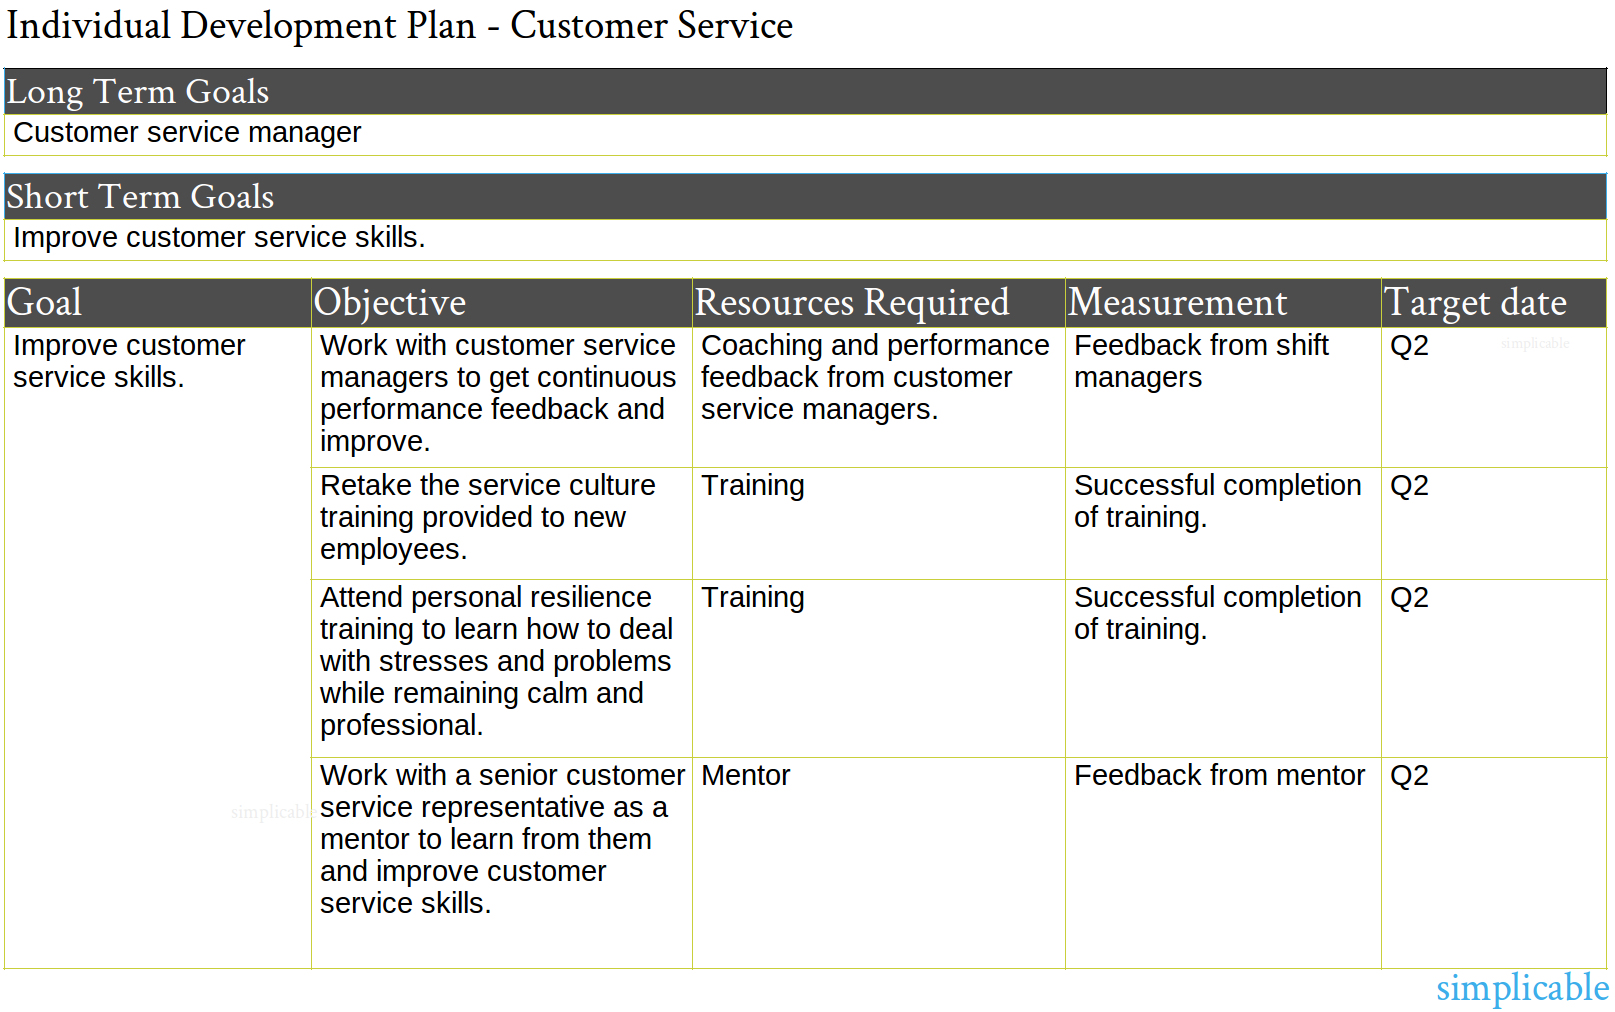 Example individual development plan customer service for an employee with low performance who needs to show immediate improvement.